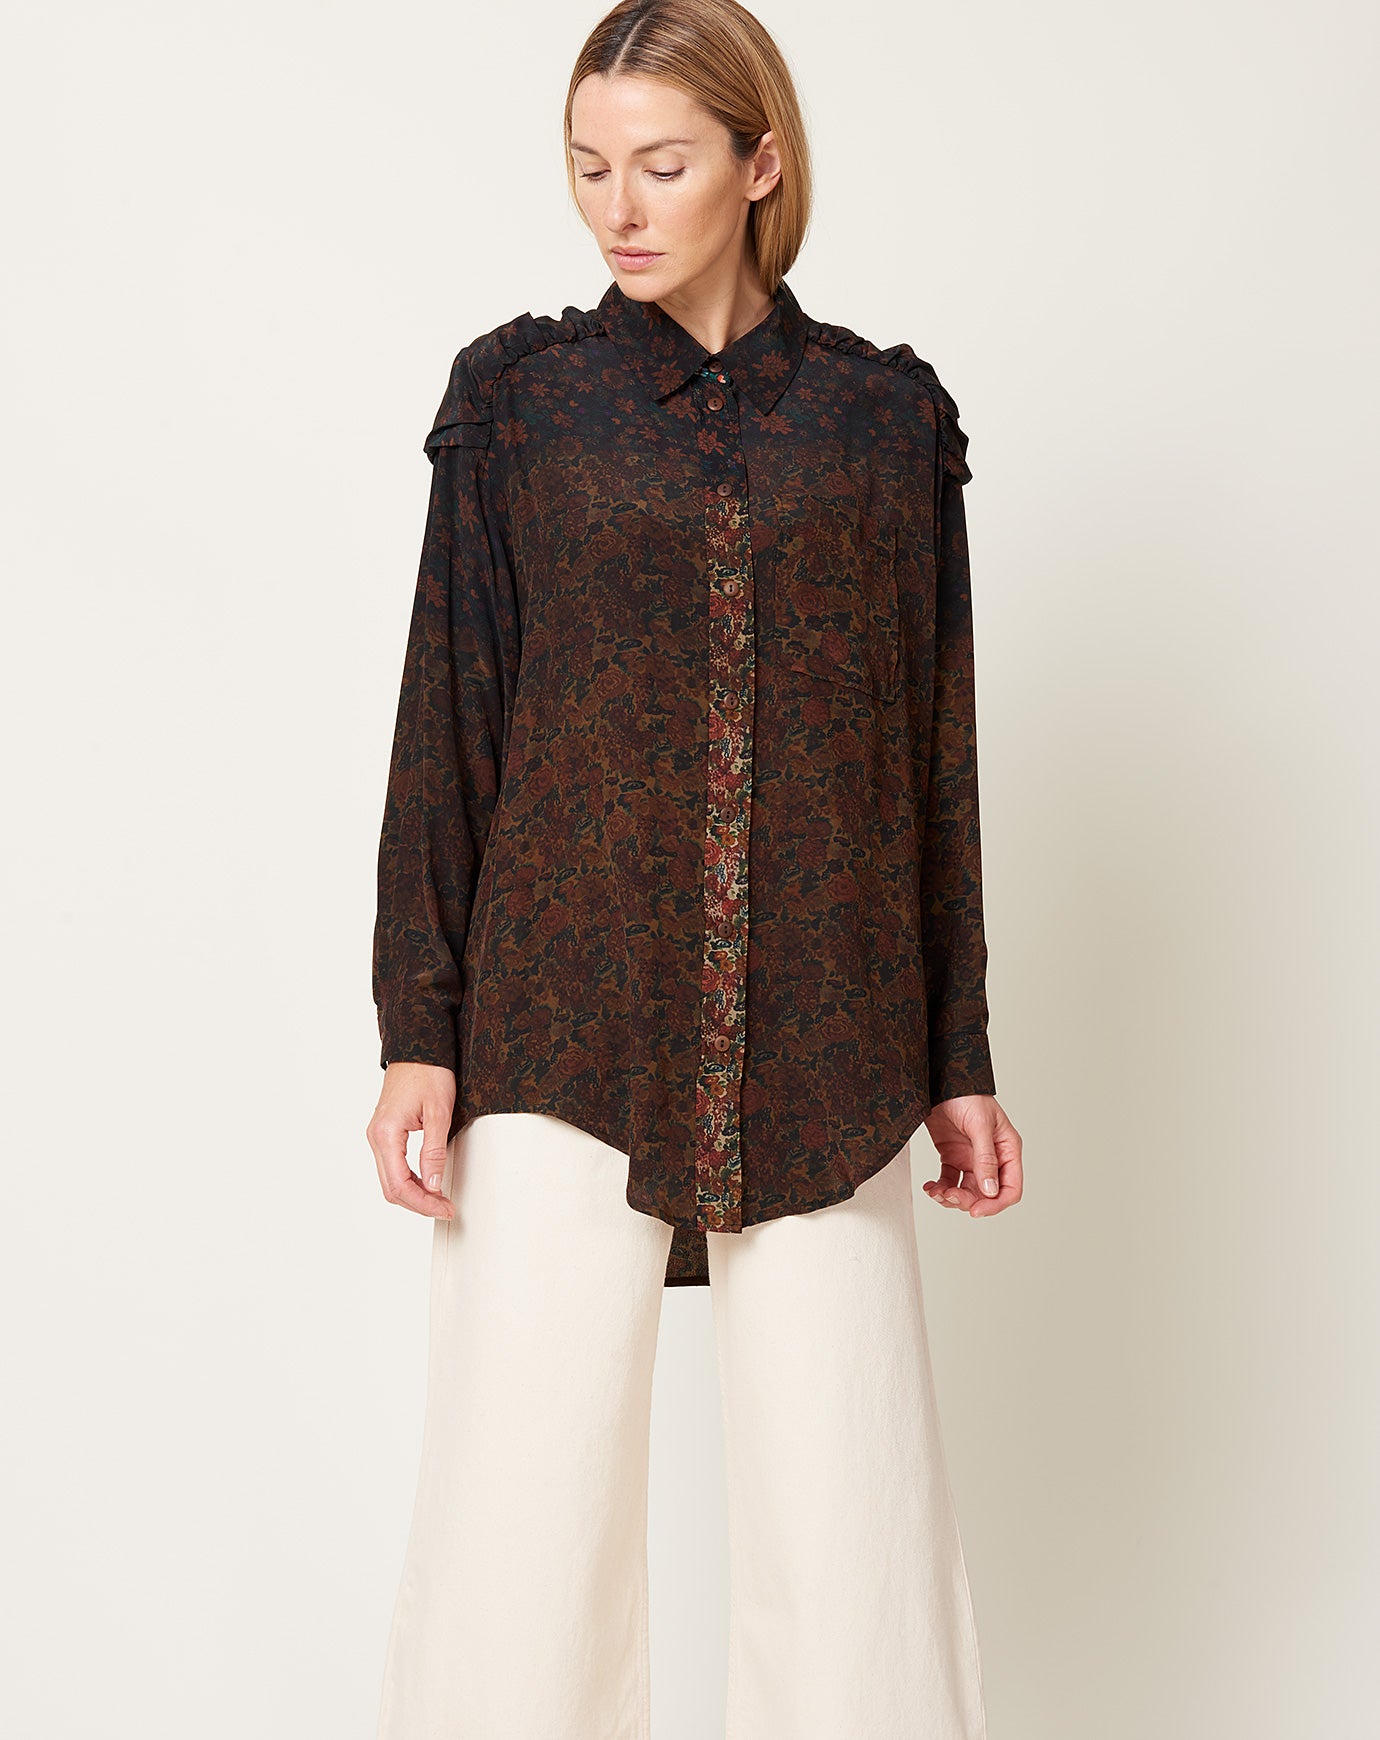 Anntian Shirt in Mystic Flowers